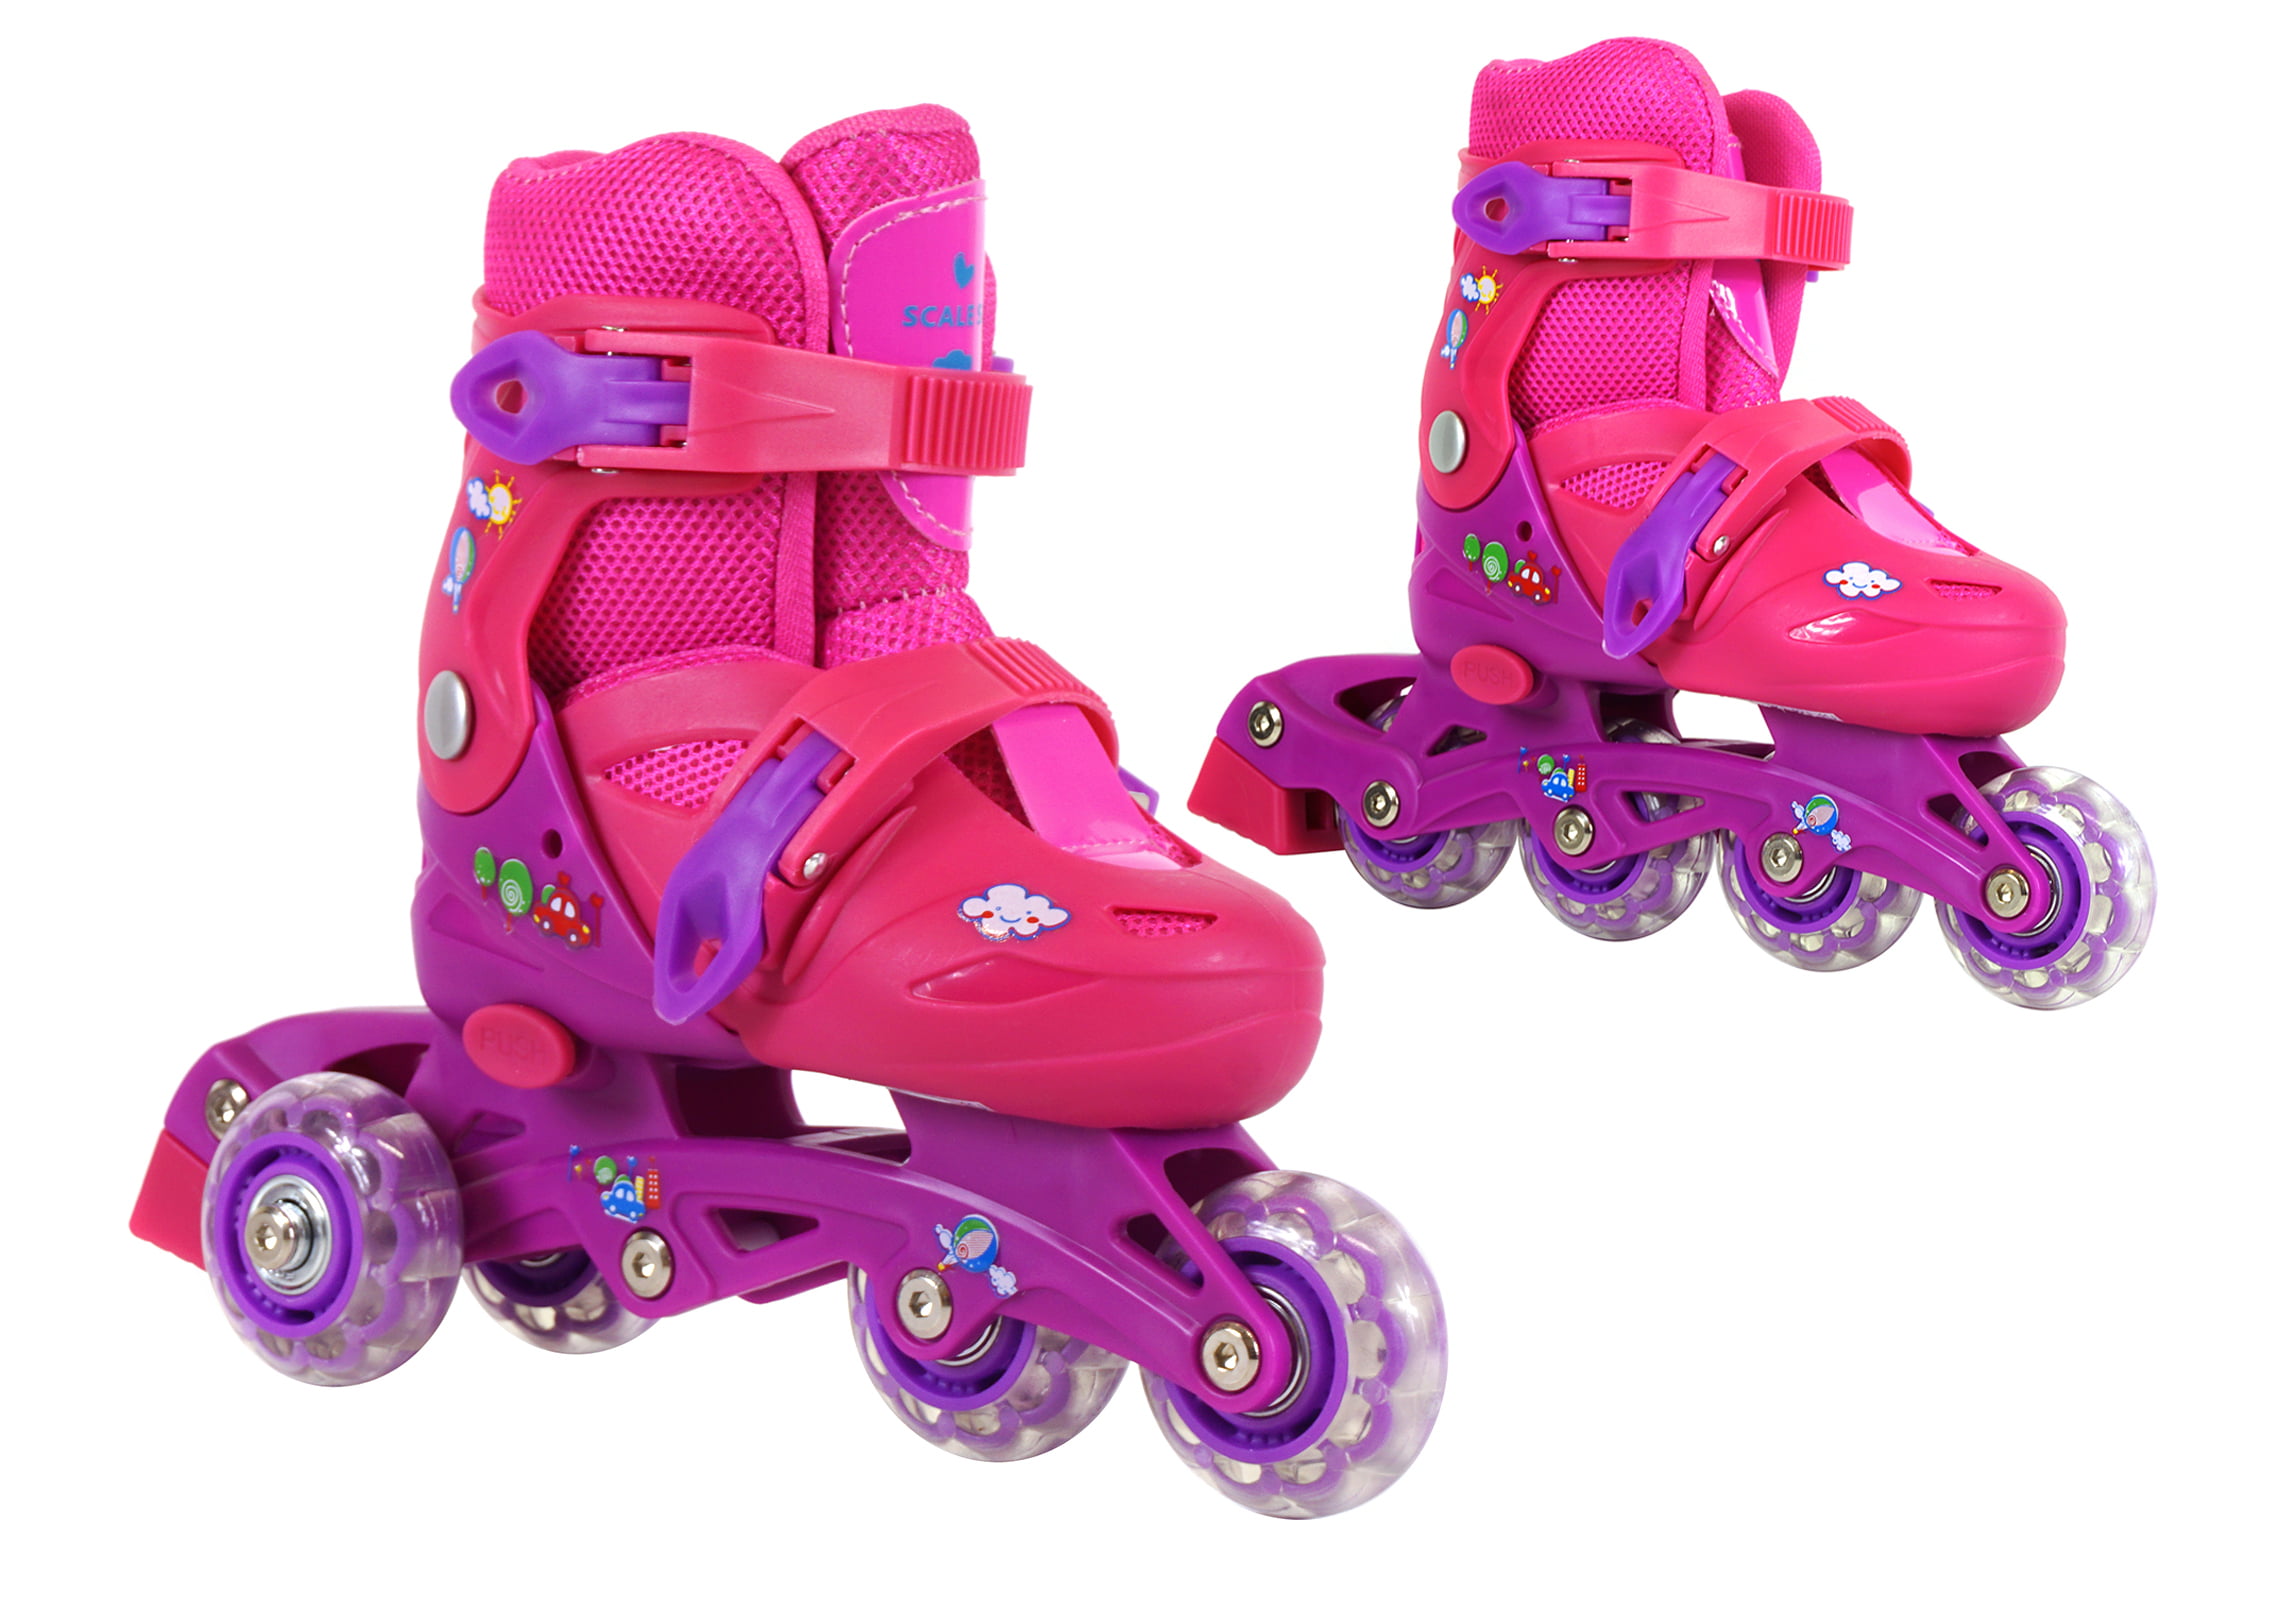 Kids and Ladies Rollerskates 2in1 set meteor 2in1 Roller Skates and Ice Skates Purchase and have fun for the whole year